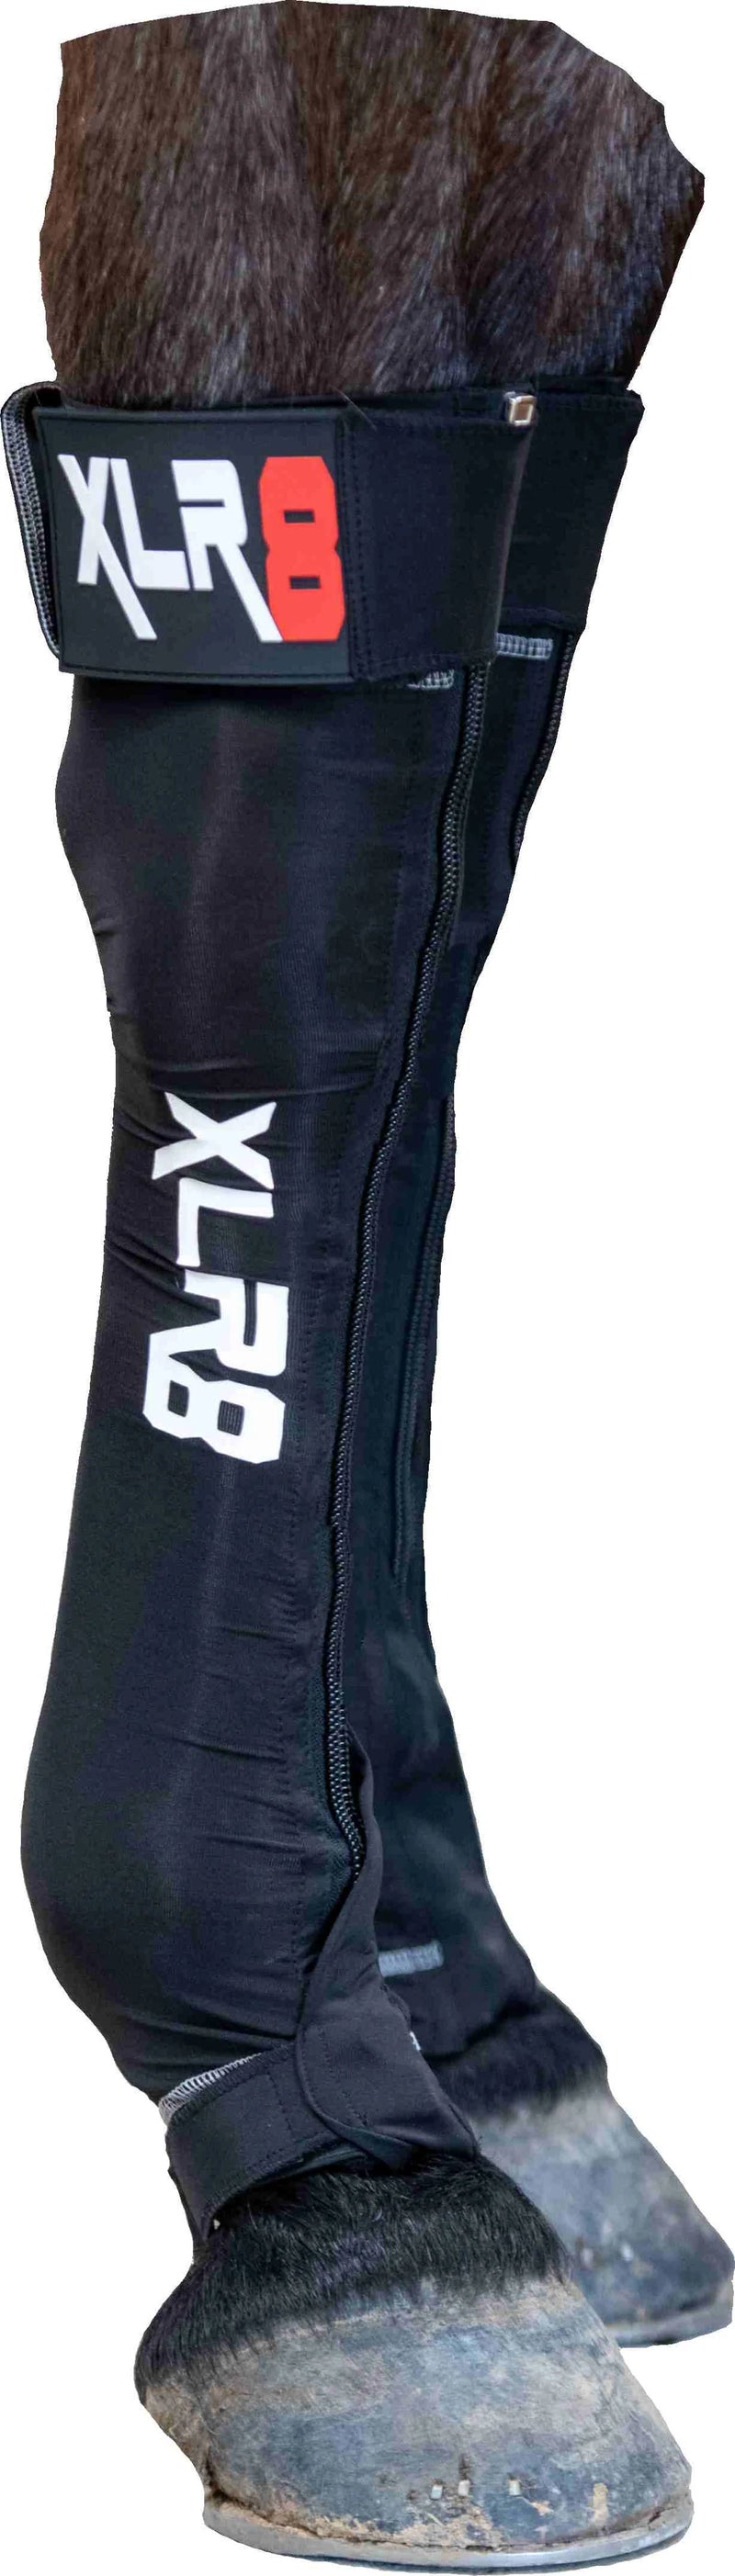 XLR8 FRONT G-Force Compression Boots